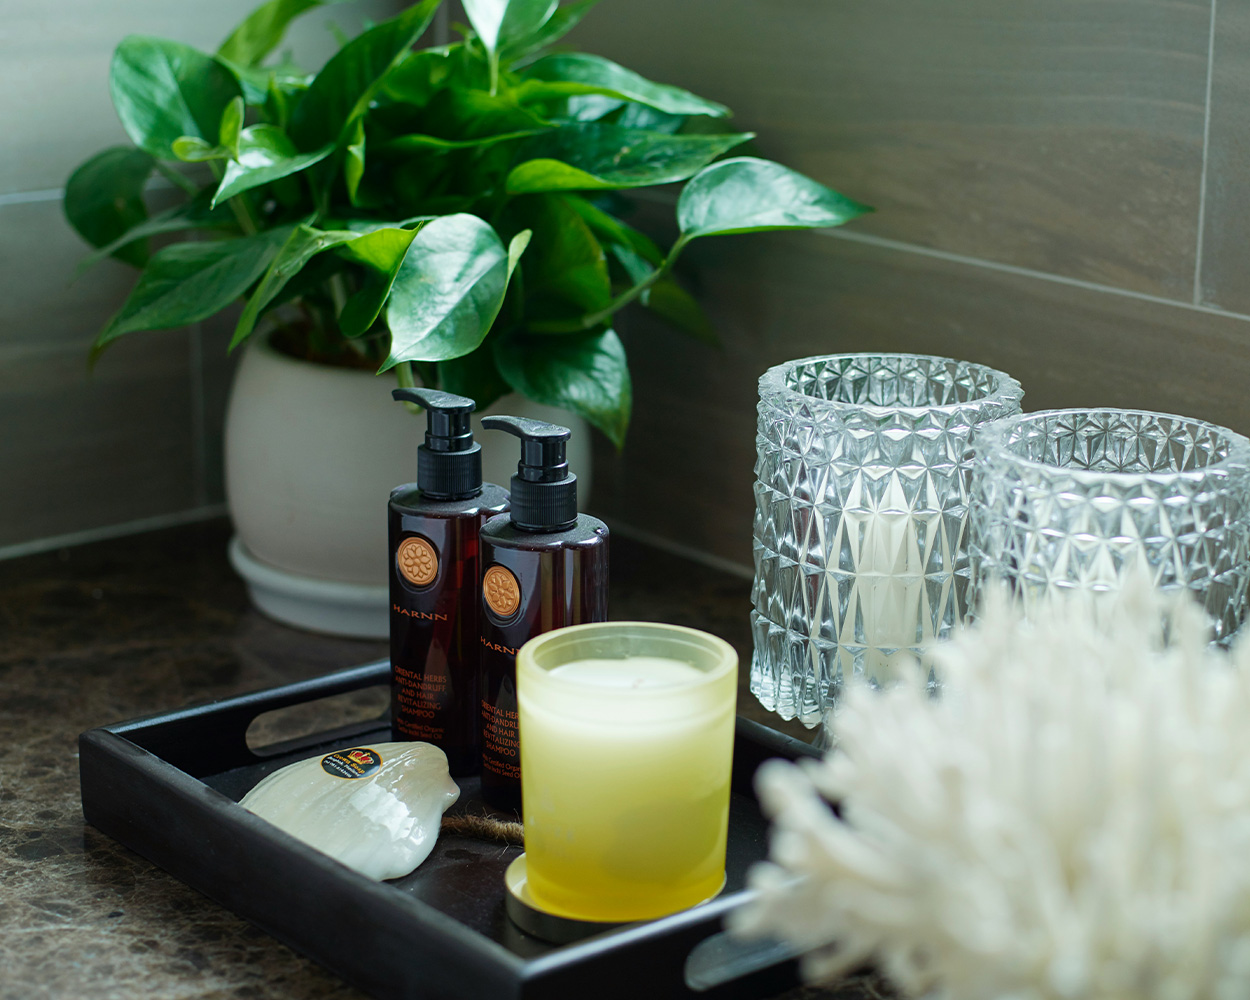 Bathroom counter with black tray holding a candle, soaps and lotions, and two crystal glasses sitting next to a potted plant.